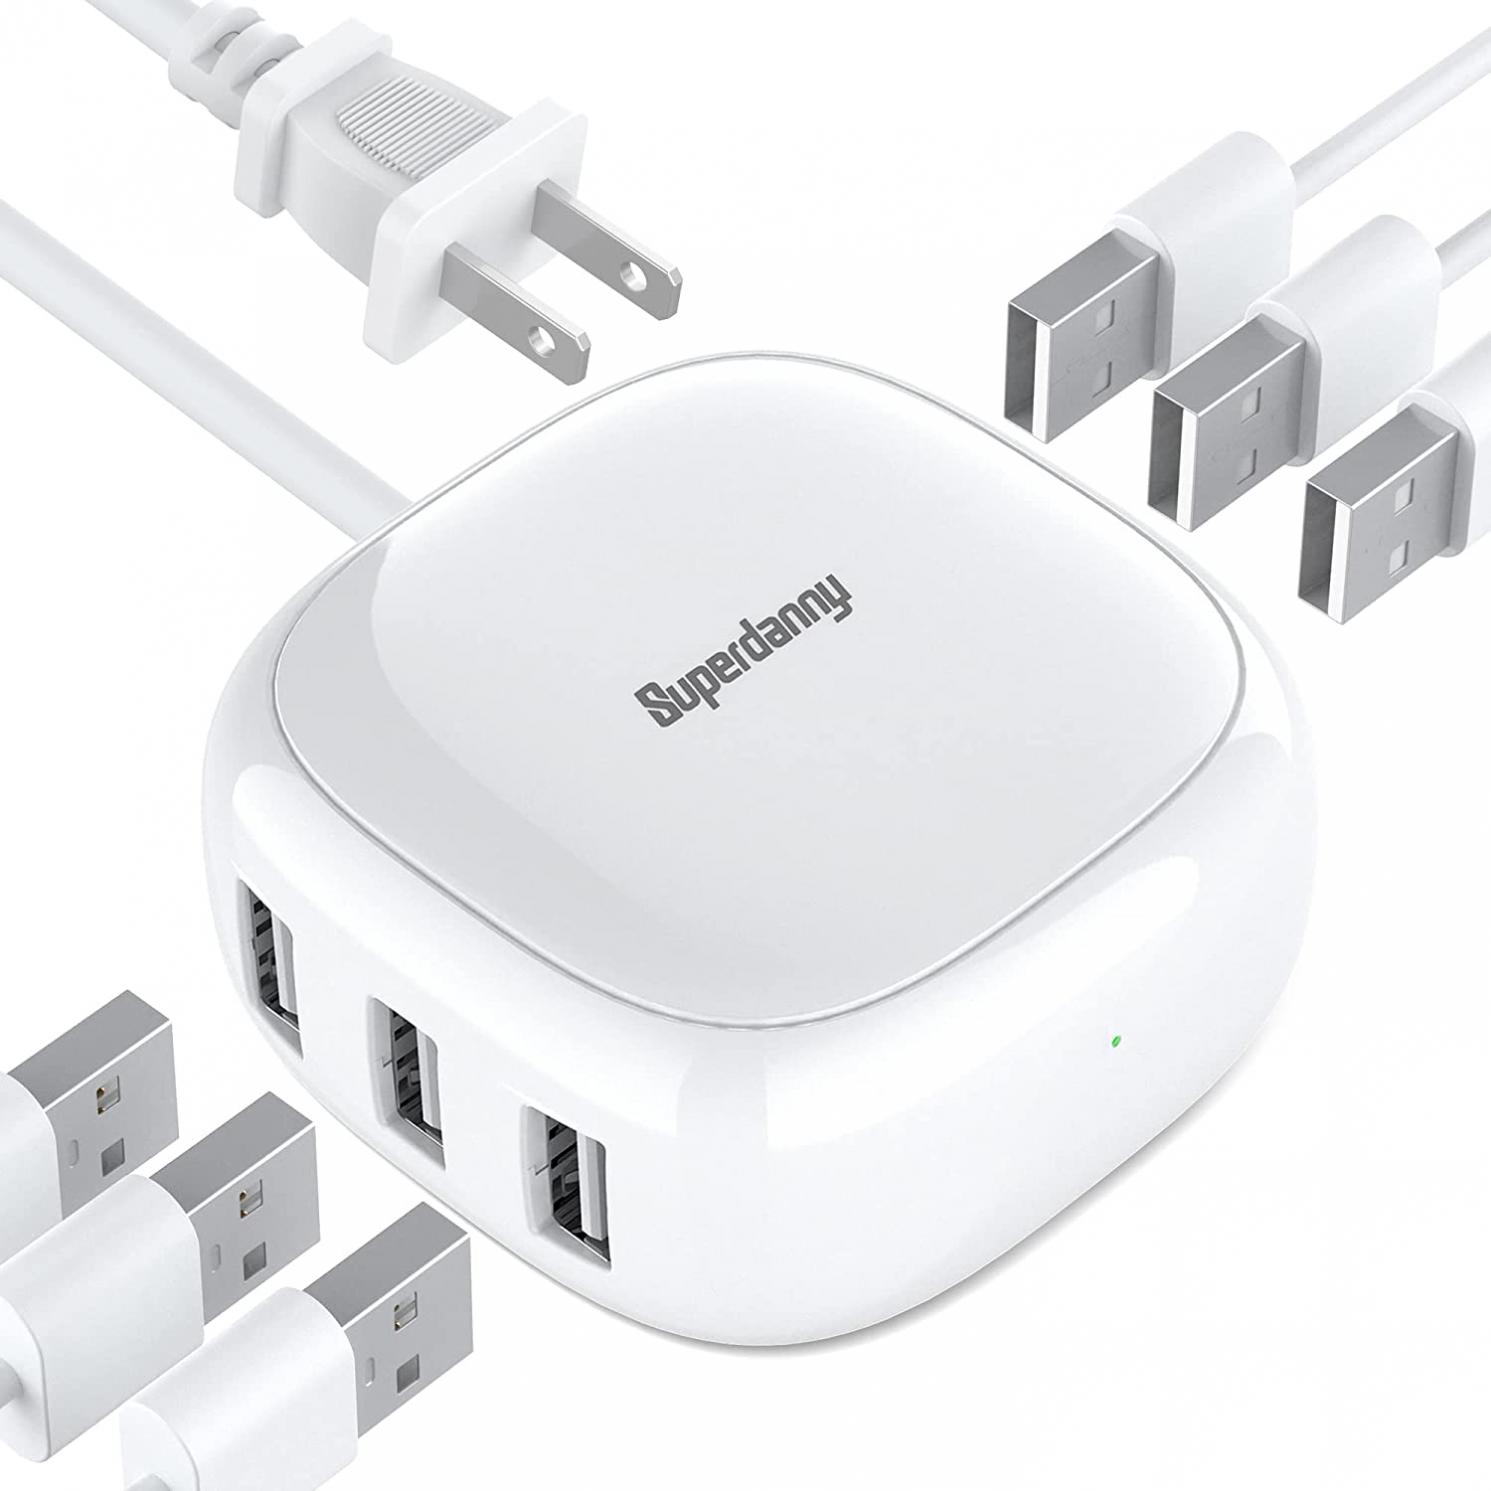 40W Mini USB Charging Station 8A, SUPERDANNY 6-Port Wall Charger for Multiple Devices, Desktop USB Charging Hub with 4ft Cable, Compatible with iPhone, iPad, Galaxy, Pixel, for Travel, Cruise, White